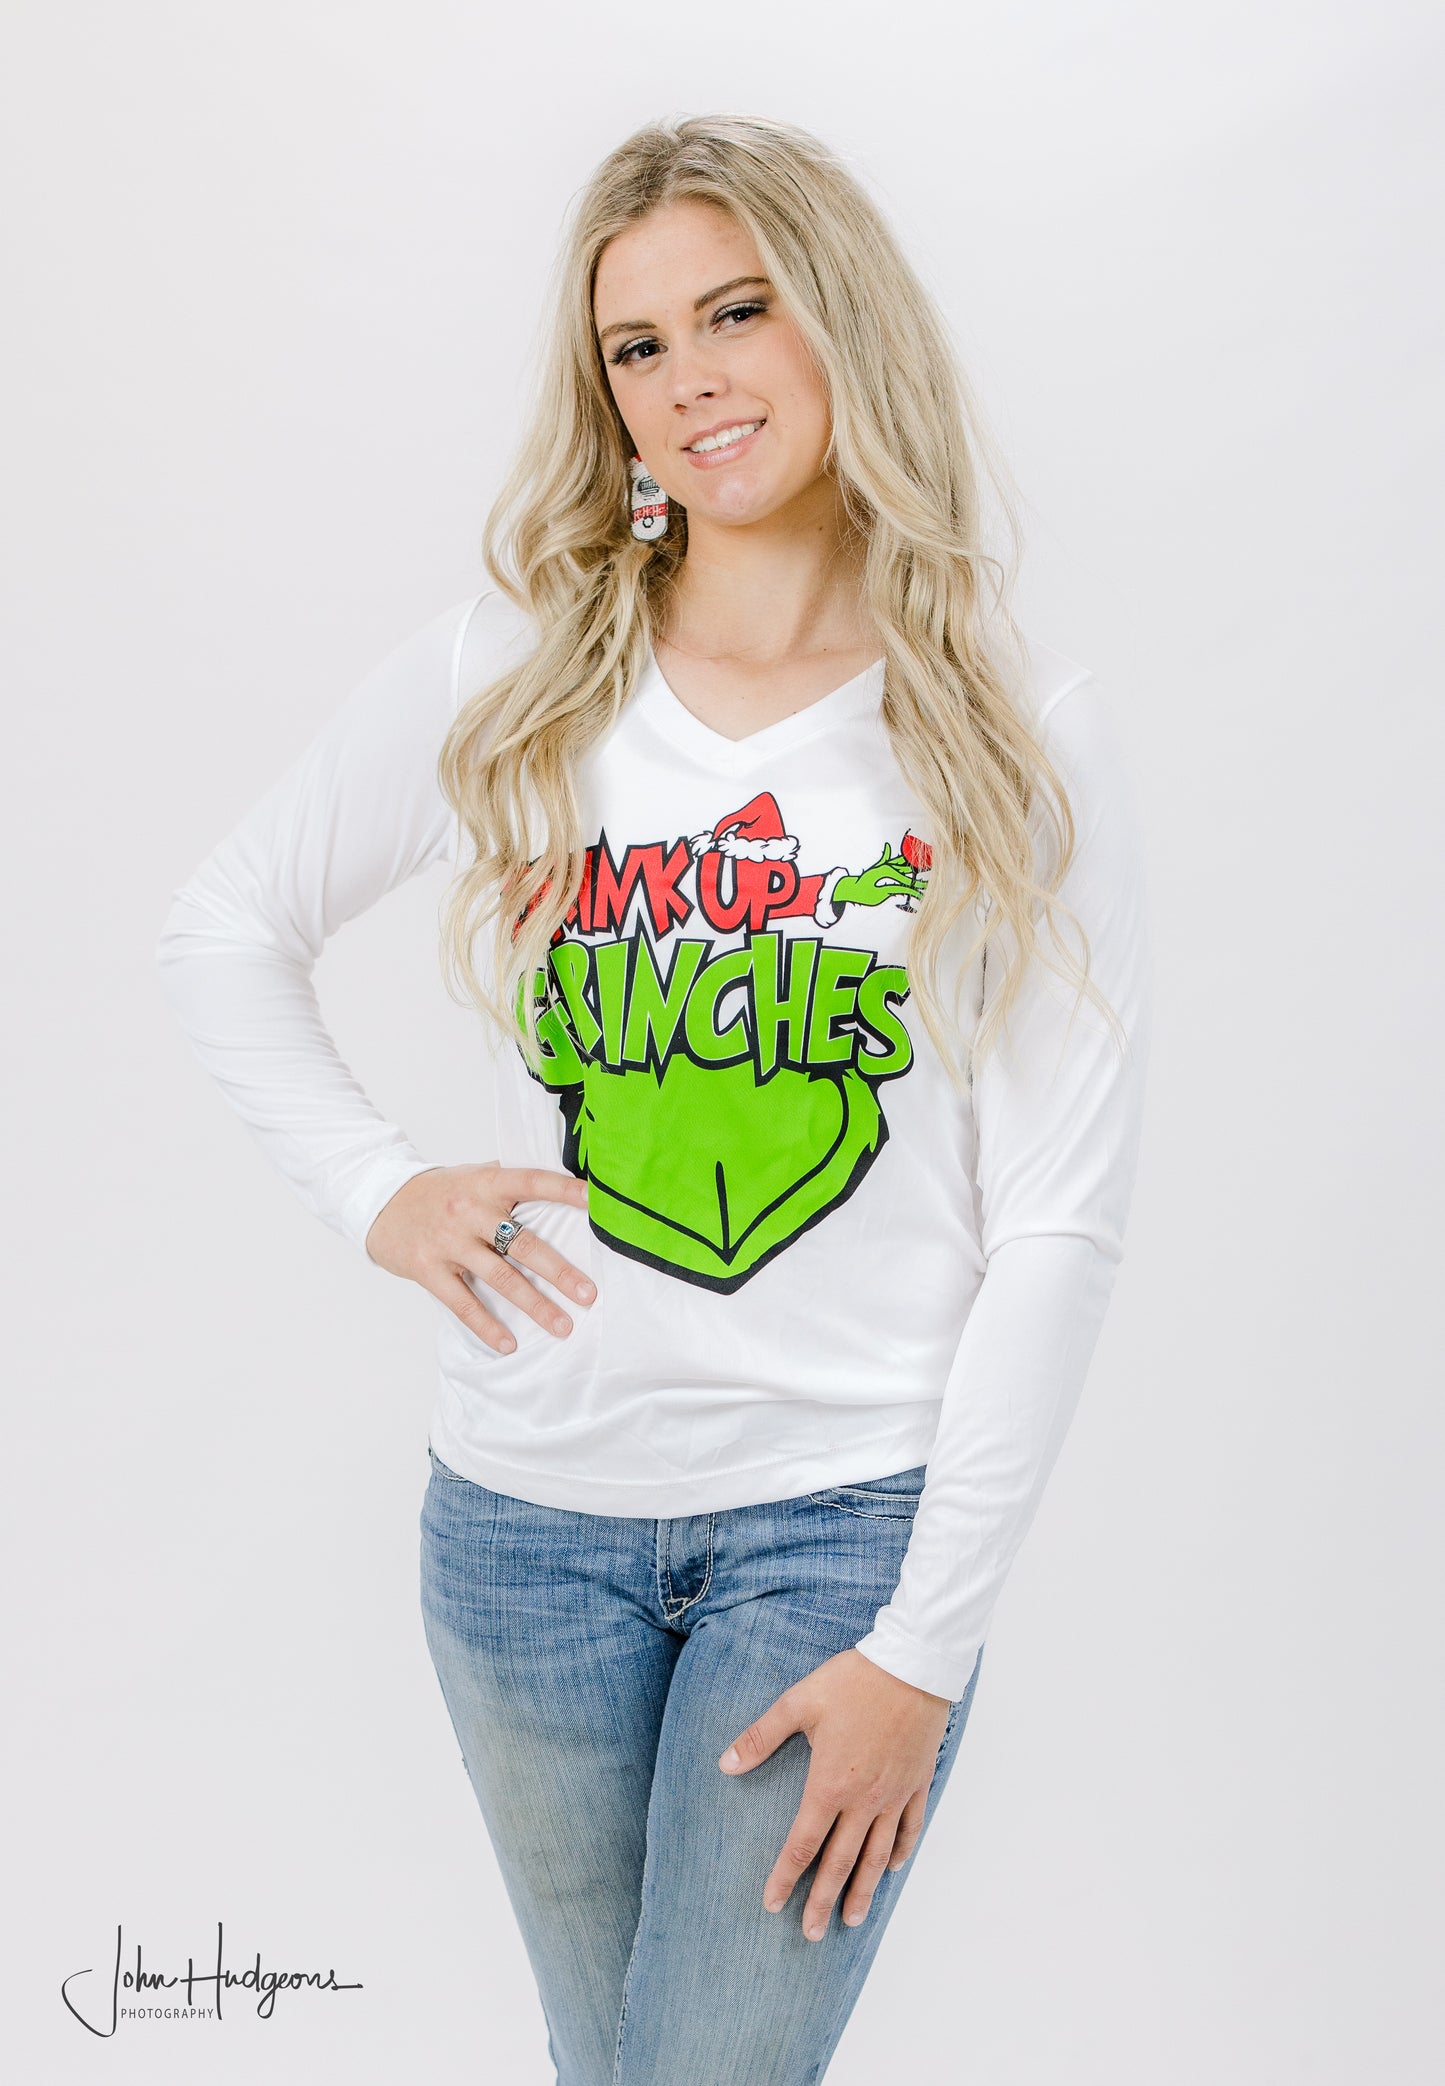 Drink Up Grinches - Ladies Christmas Top